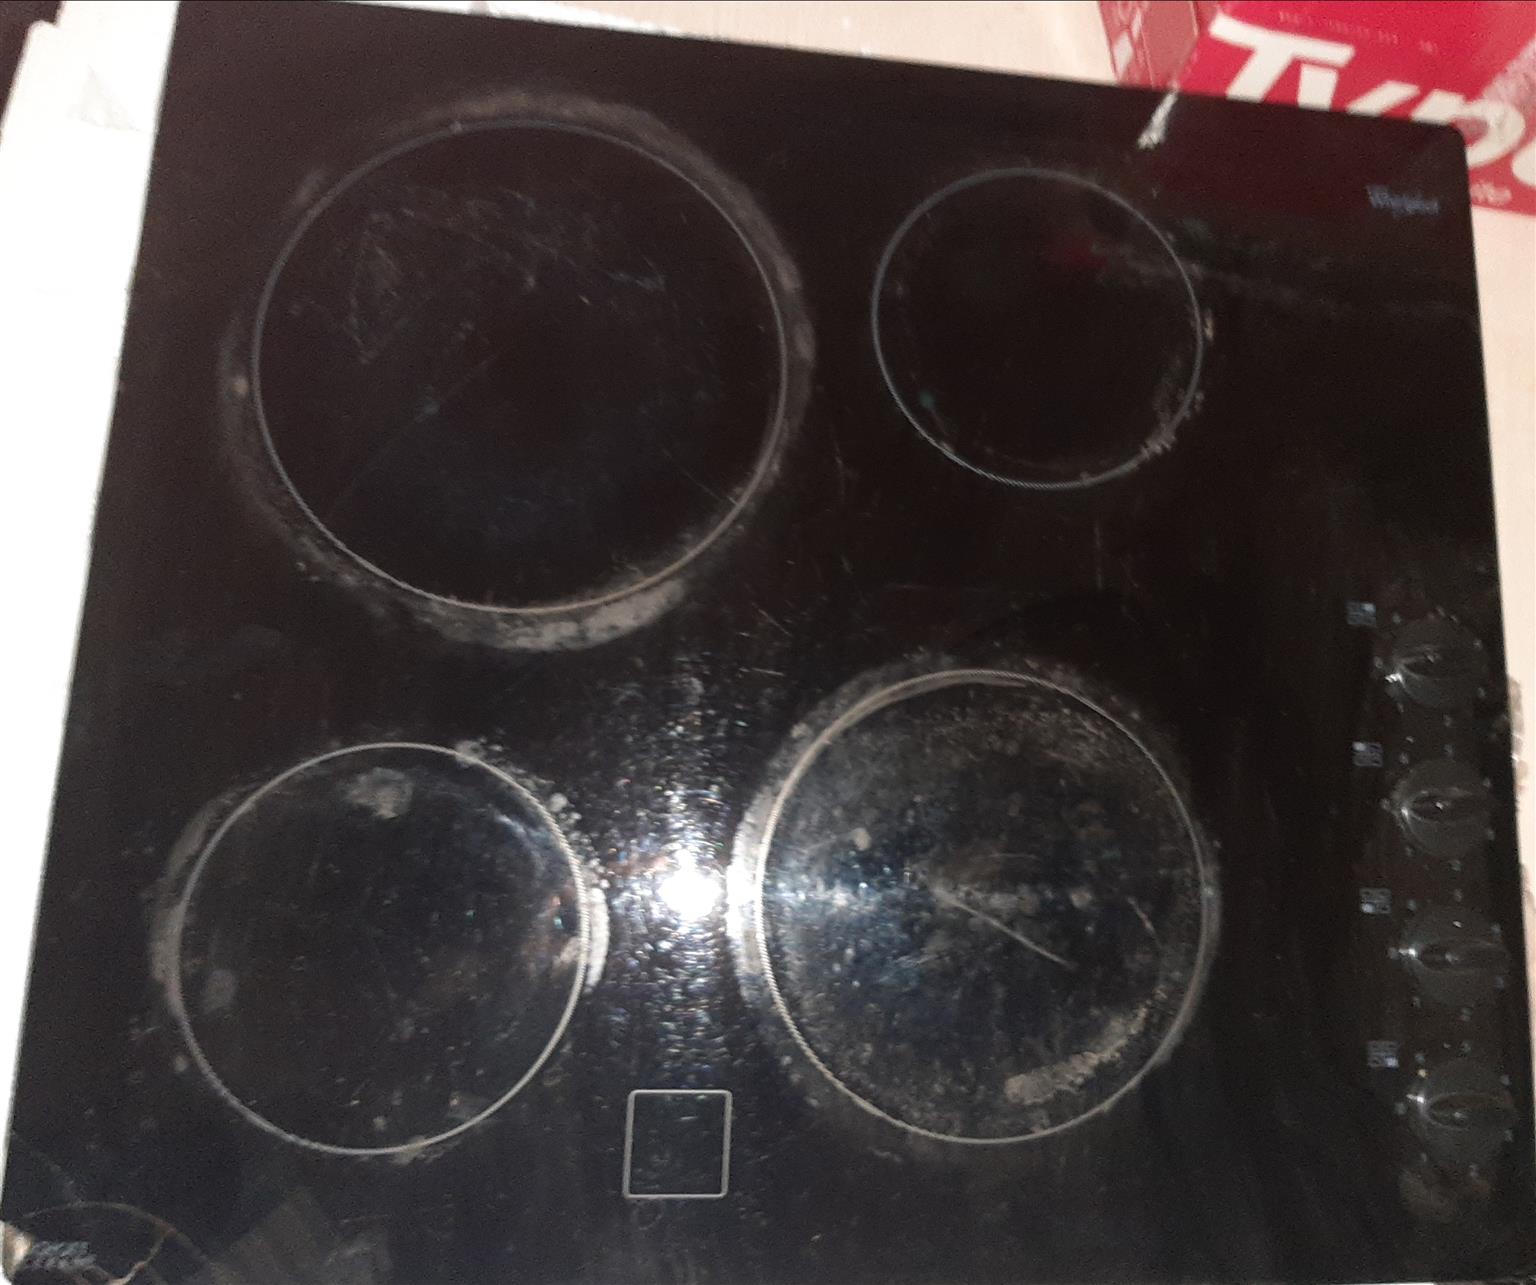 Whirlpool oven and hob